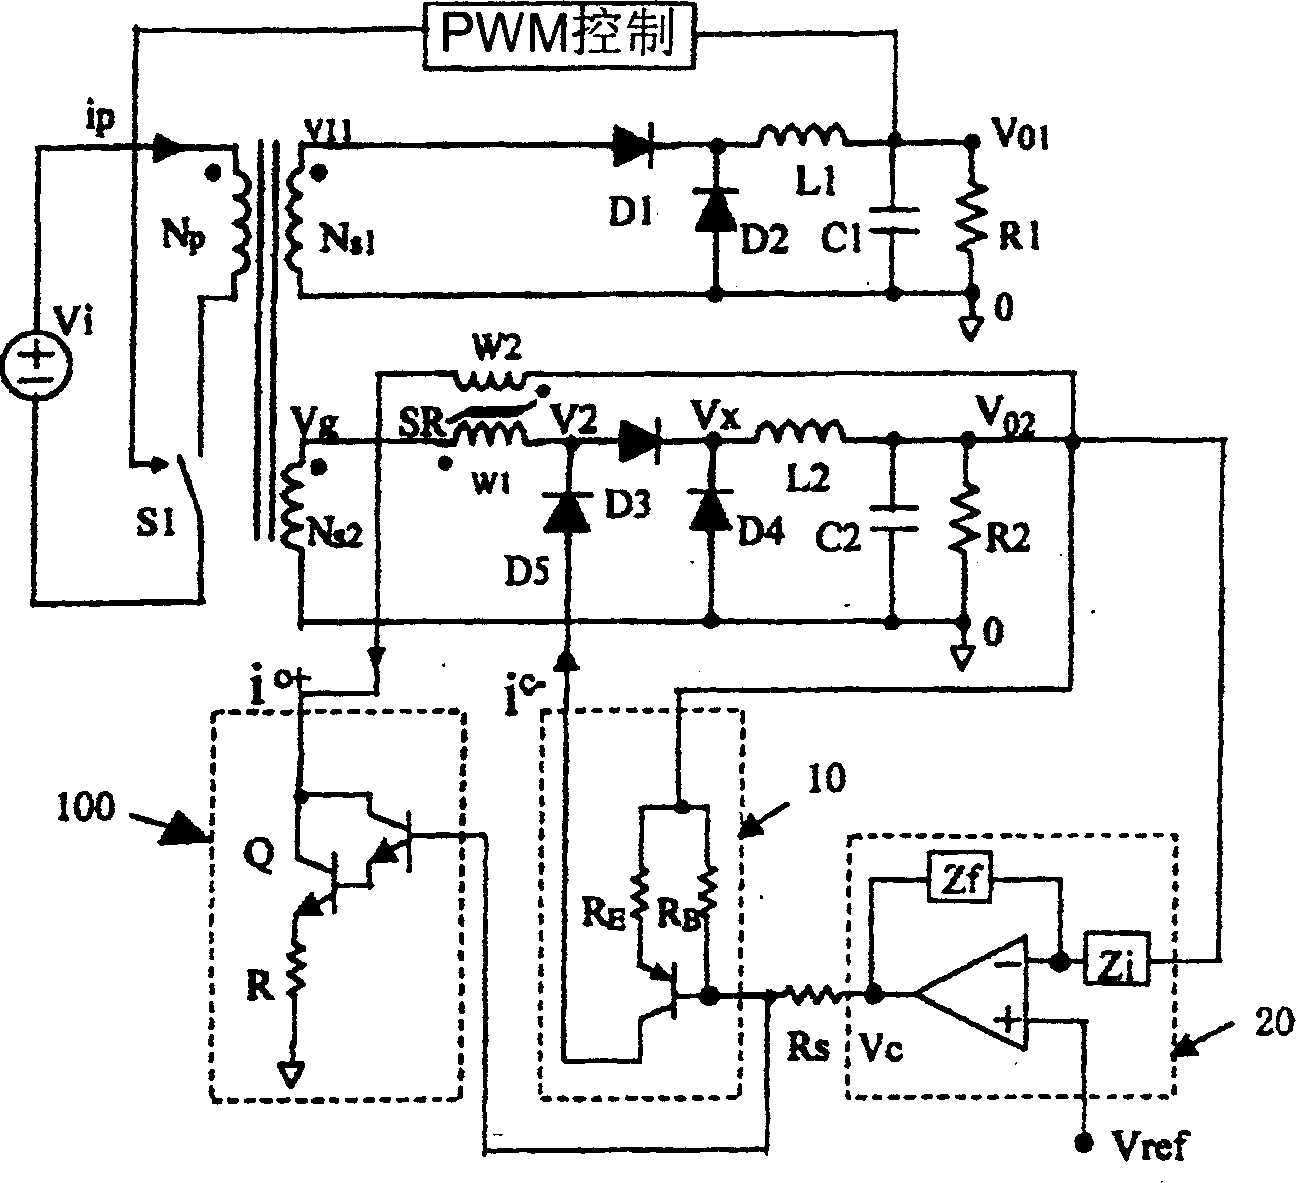 Auxiliary output voltage control realized using idirectional magnetization magnetic amplifier